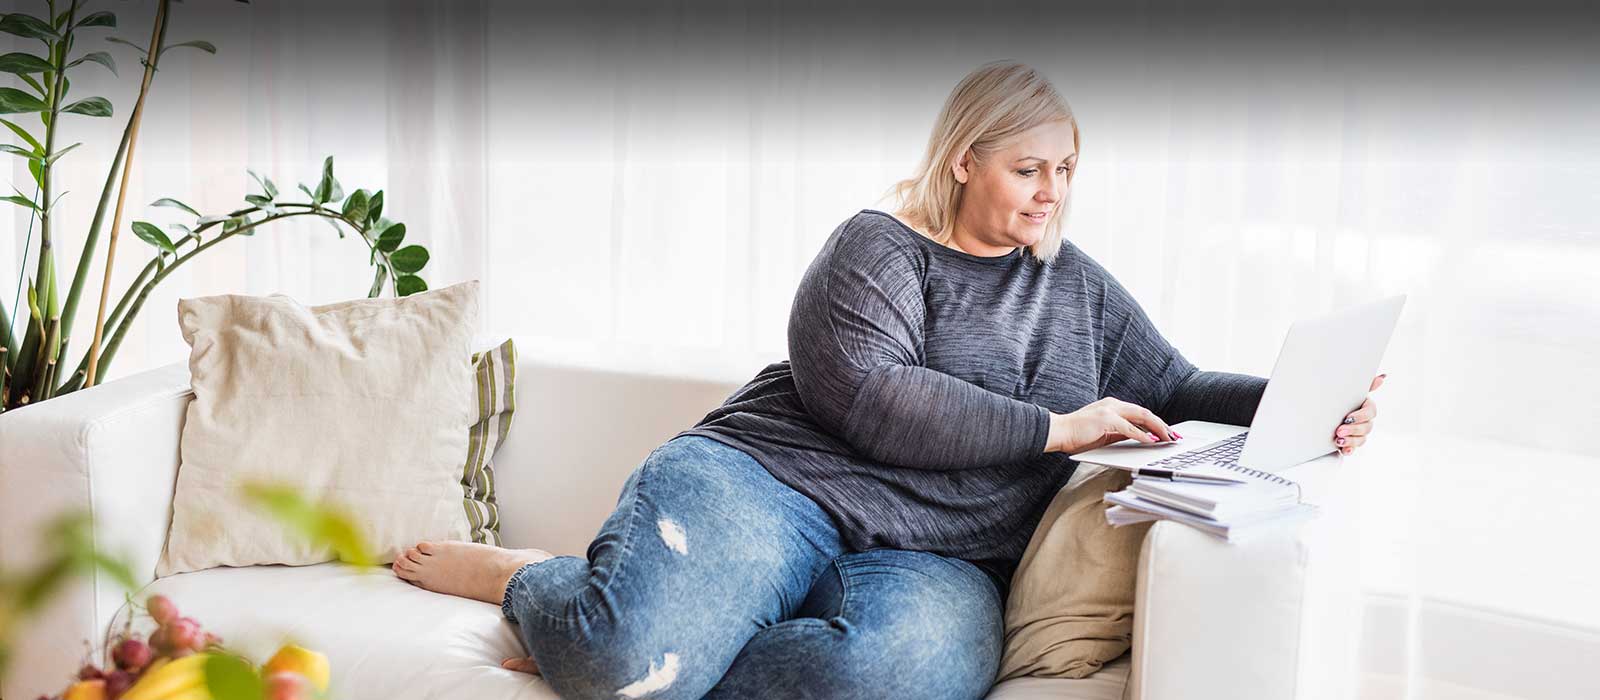 Mature woman on sofa typing on laptop